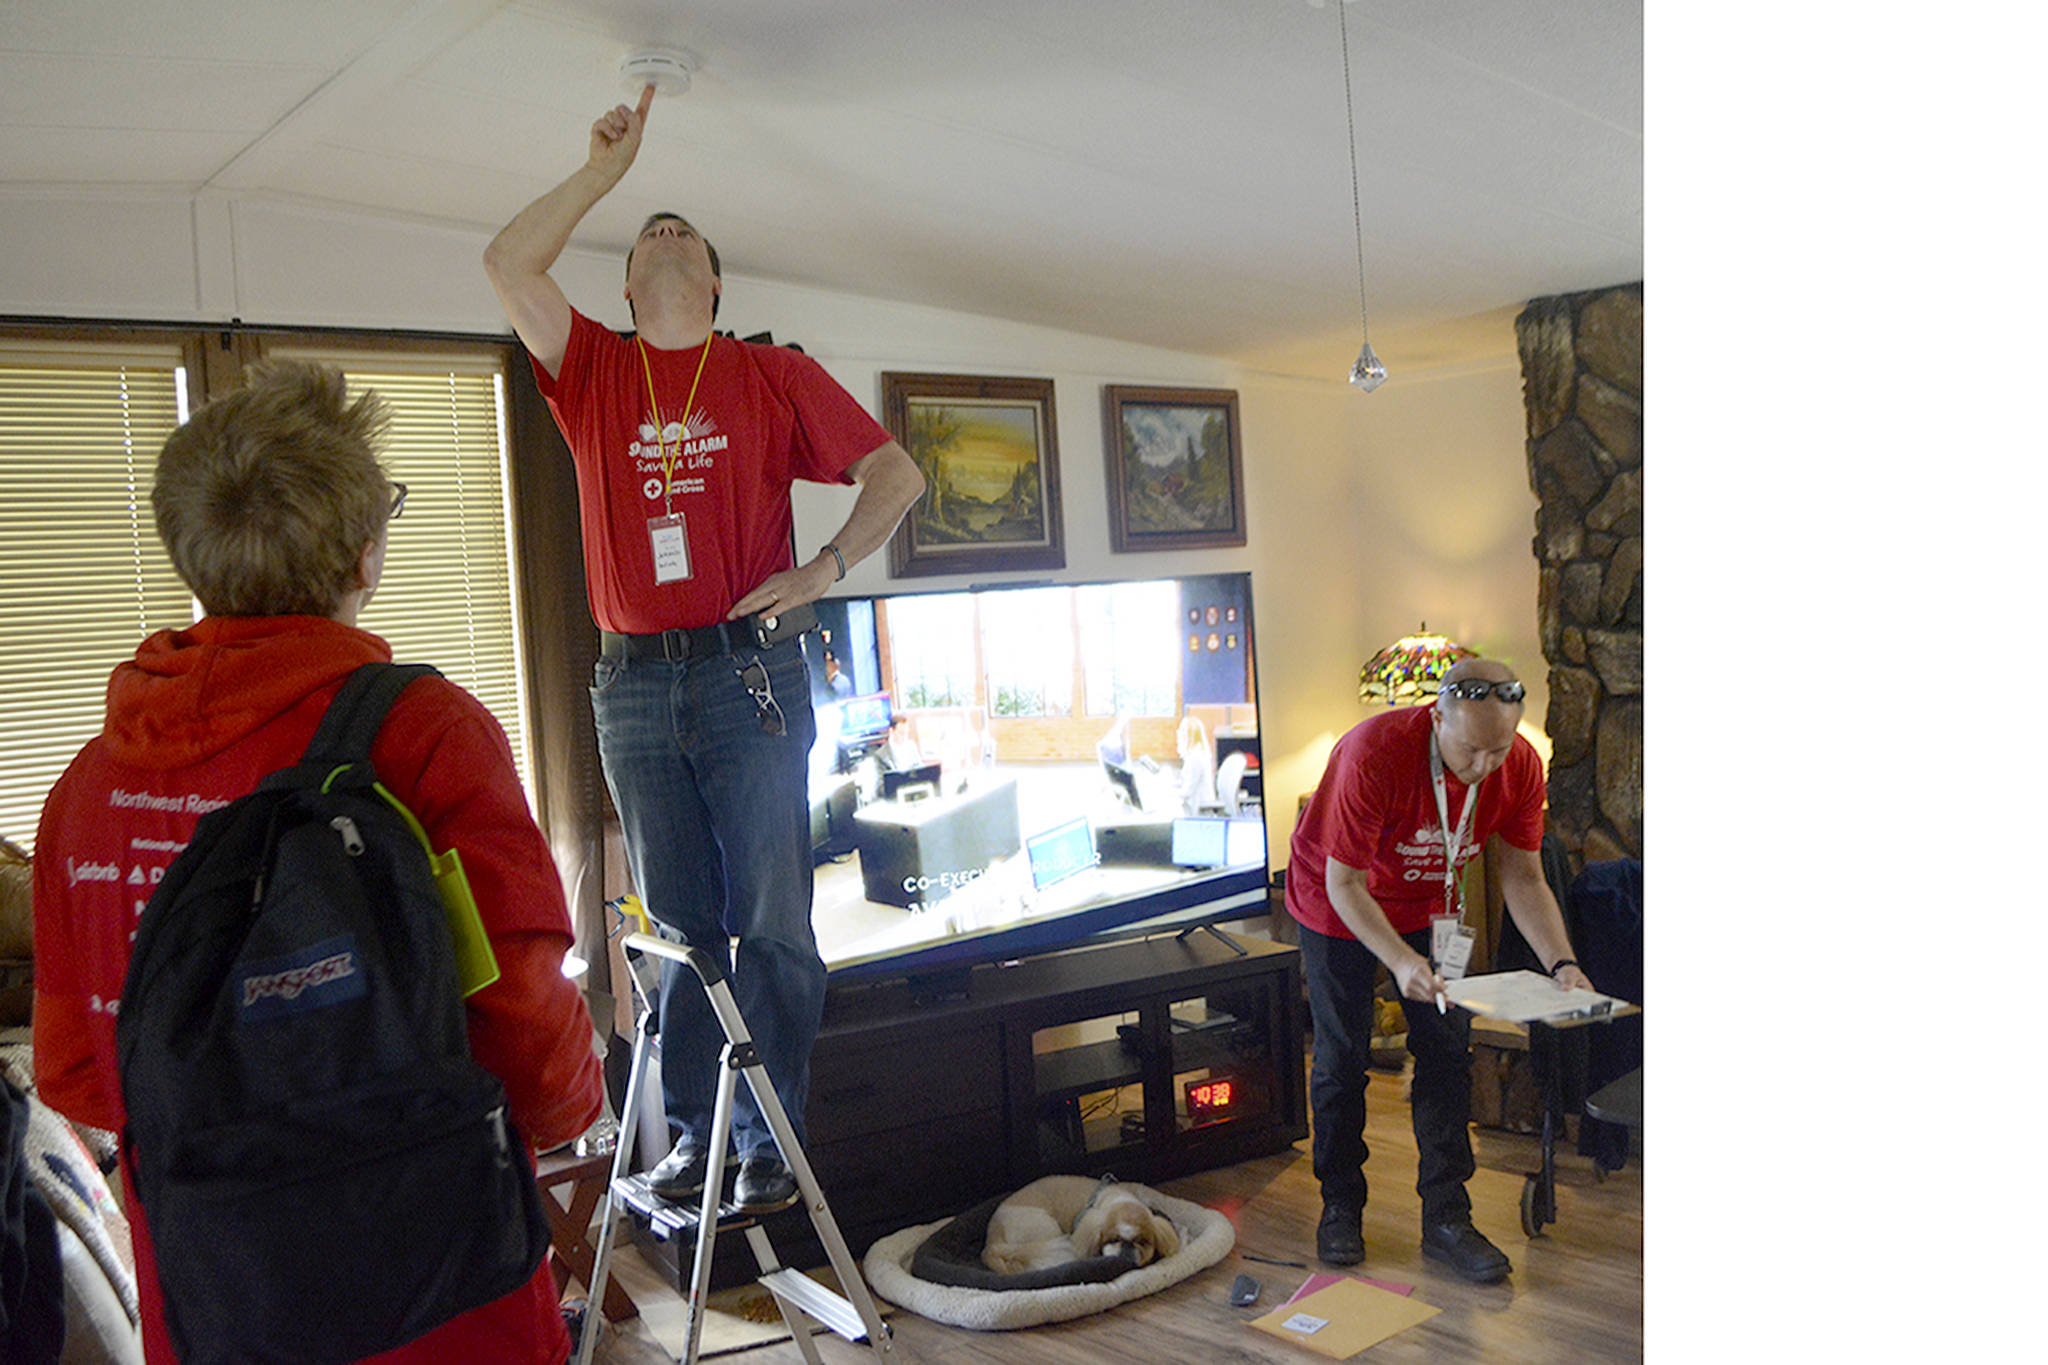 Jeraud Irvin of Snohomish puts up a smoke alarm in a home in the Glenwood neighborhood of Marysville Saturday as part of the free Sound the Alarm program with the American Red Cross. (Steve Powell/Staff Photo)